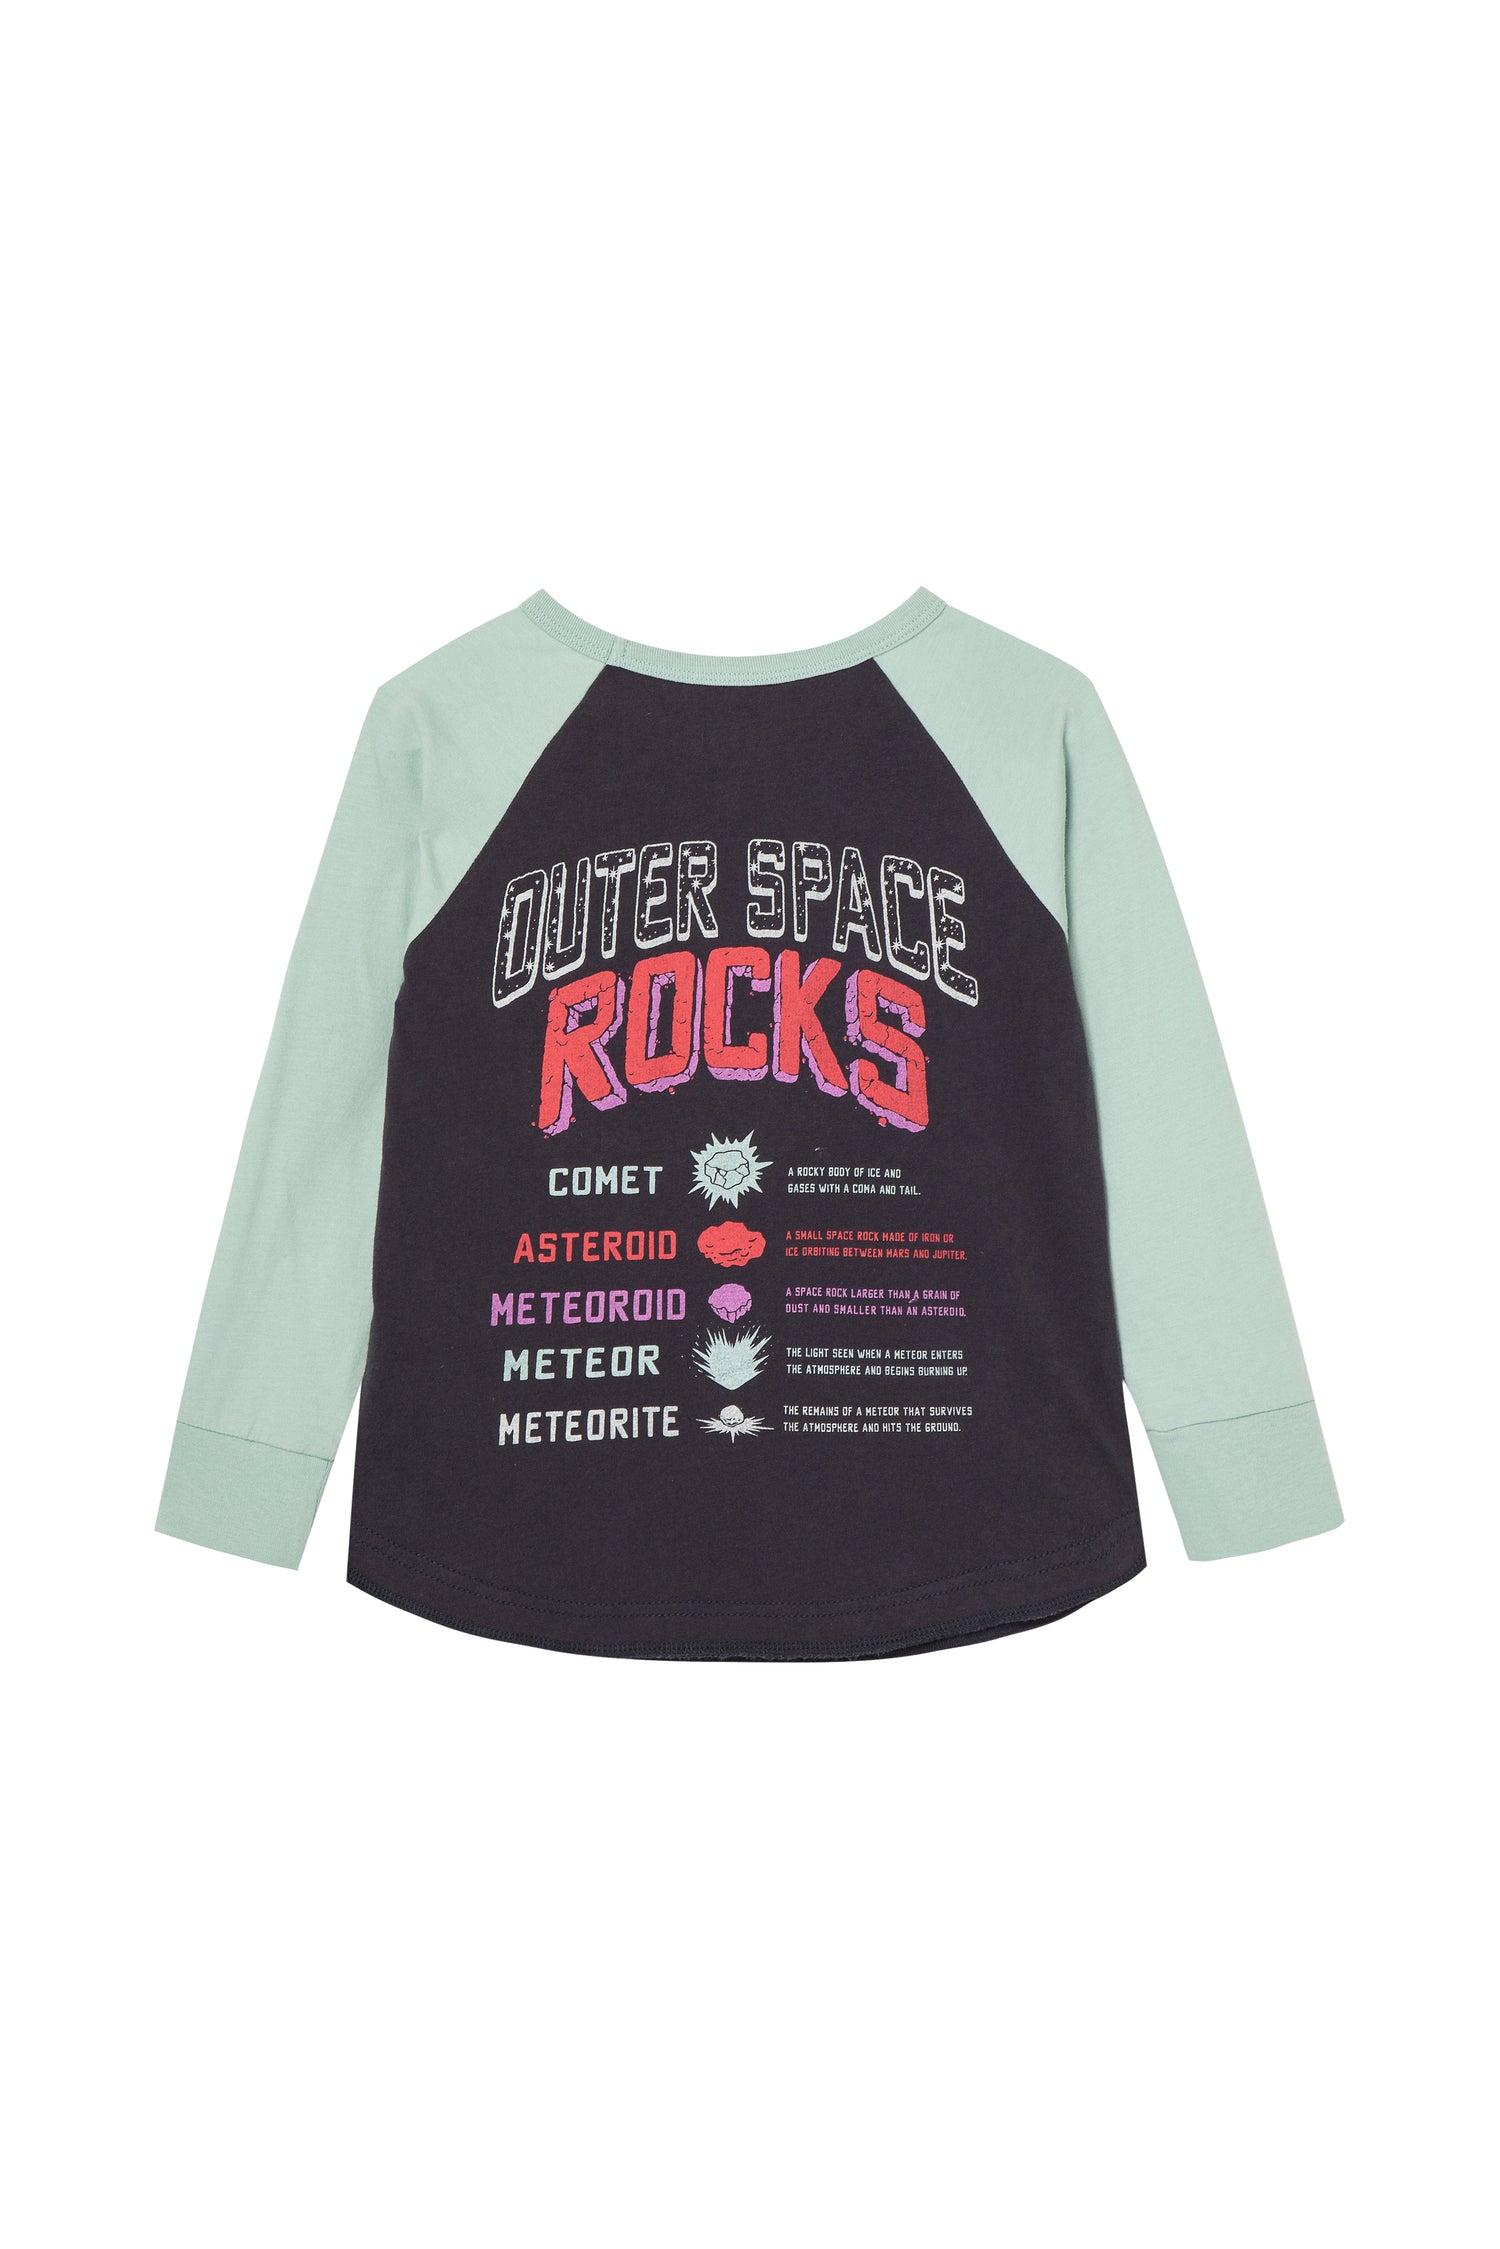 Back of Green-and-black long-sleeve t-shirt with "Space Rocks" text and definitions for each object